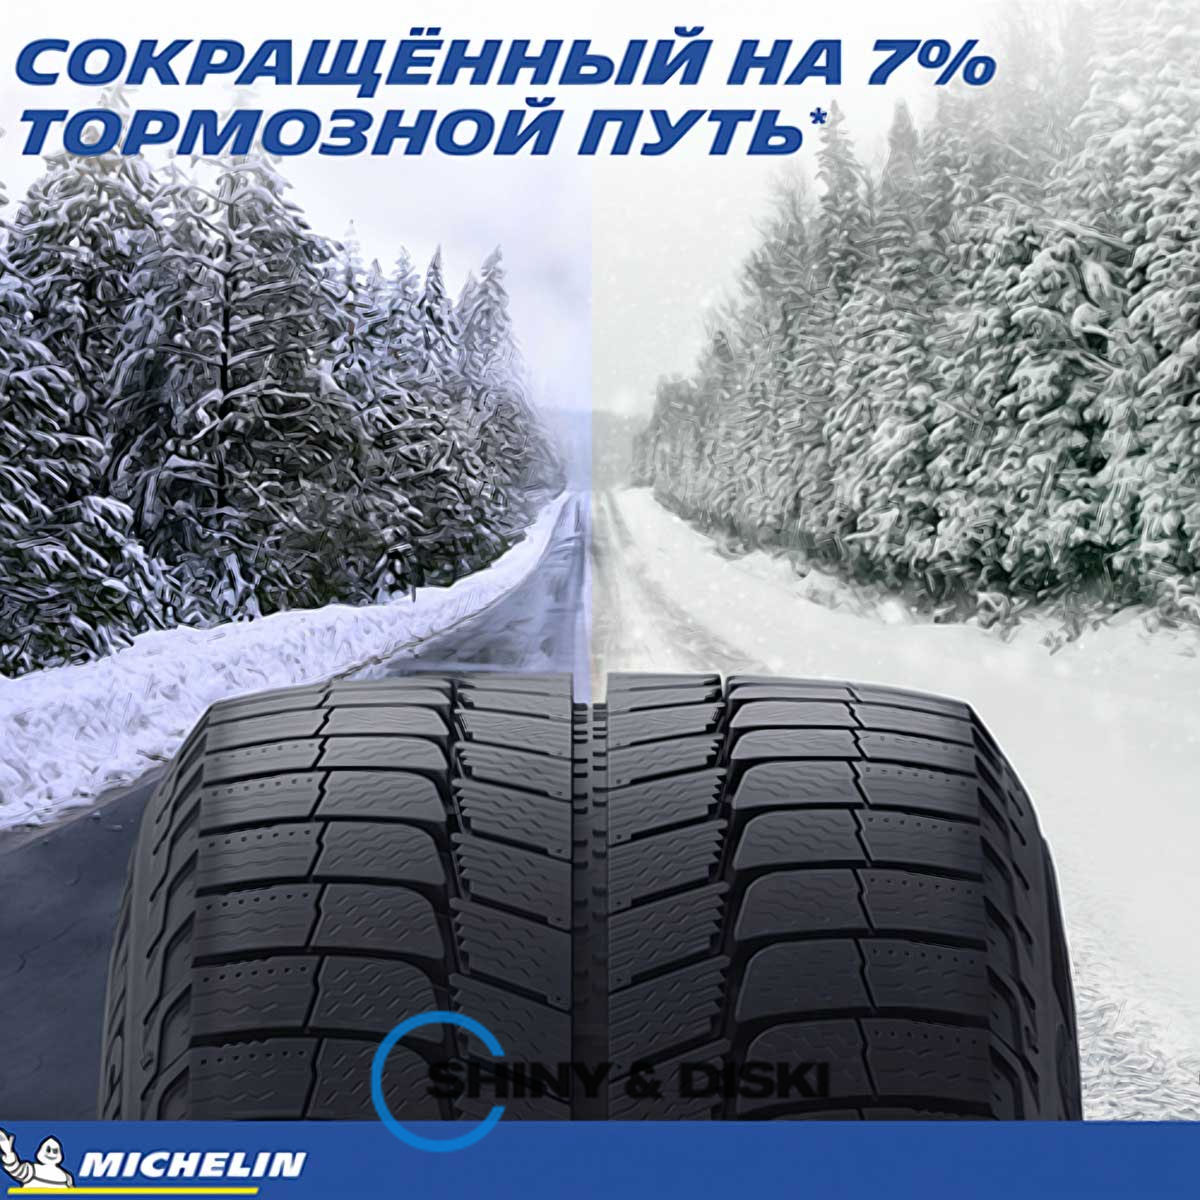 покрышки michelin x-ice xi3+ 215/60 r17 96t